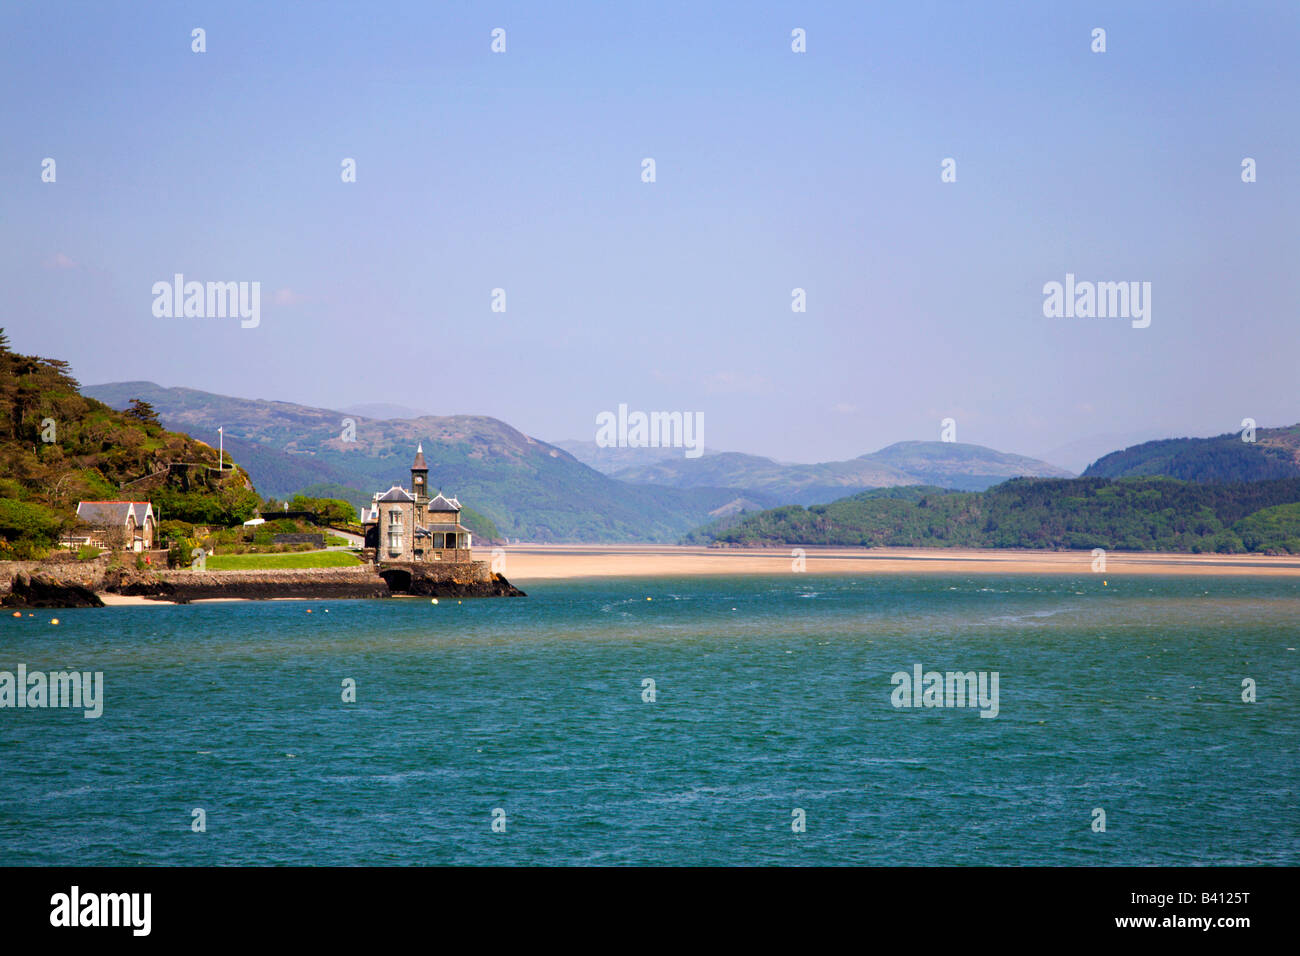 Clock Tower House Barmouth Snowdonia nel Galles Foto Stock